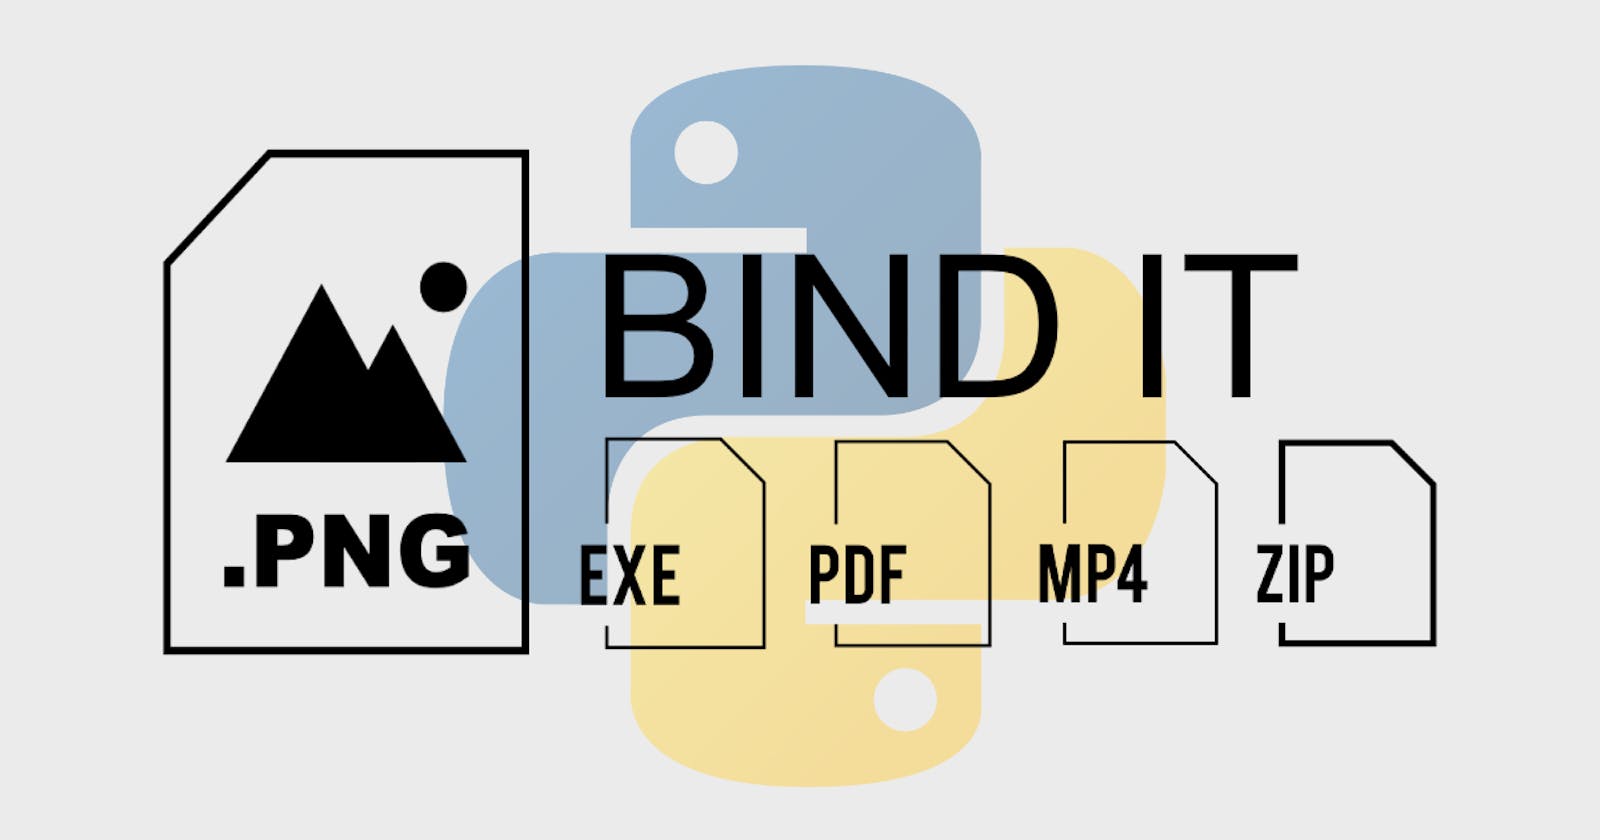 Bind IT - Bind files into images